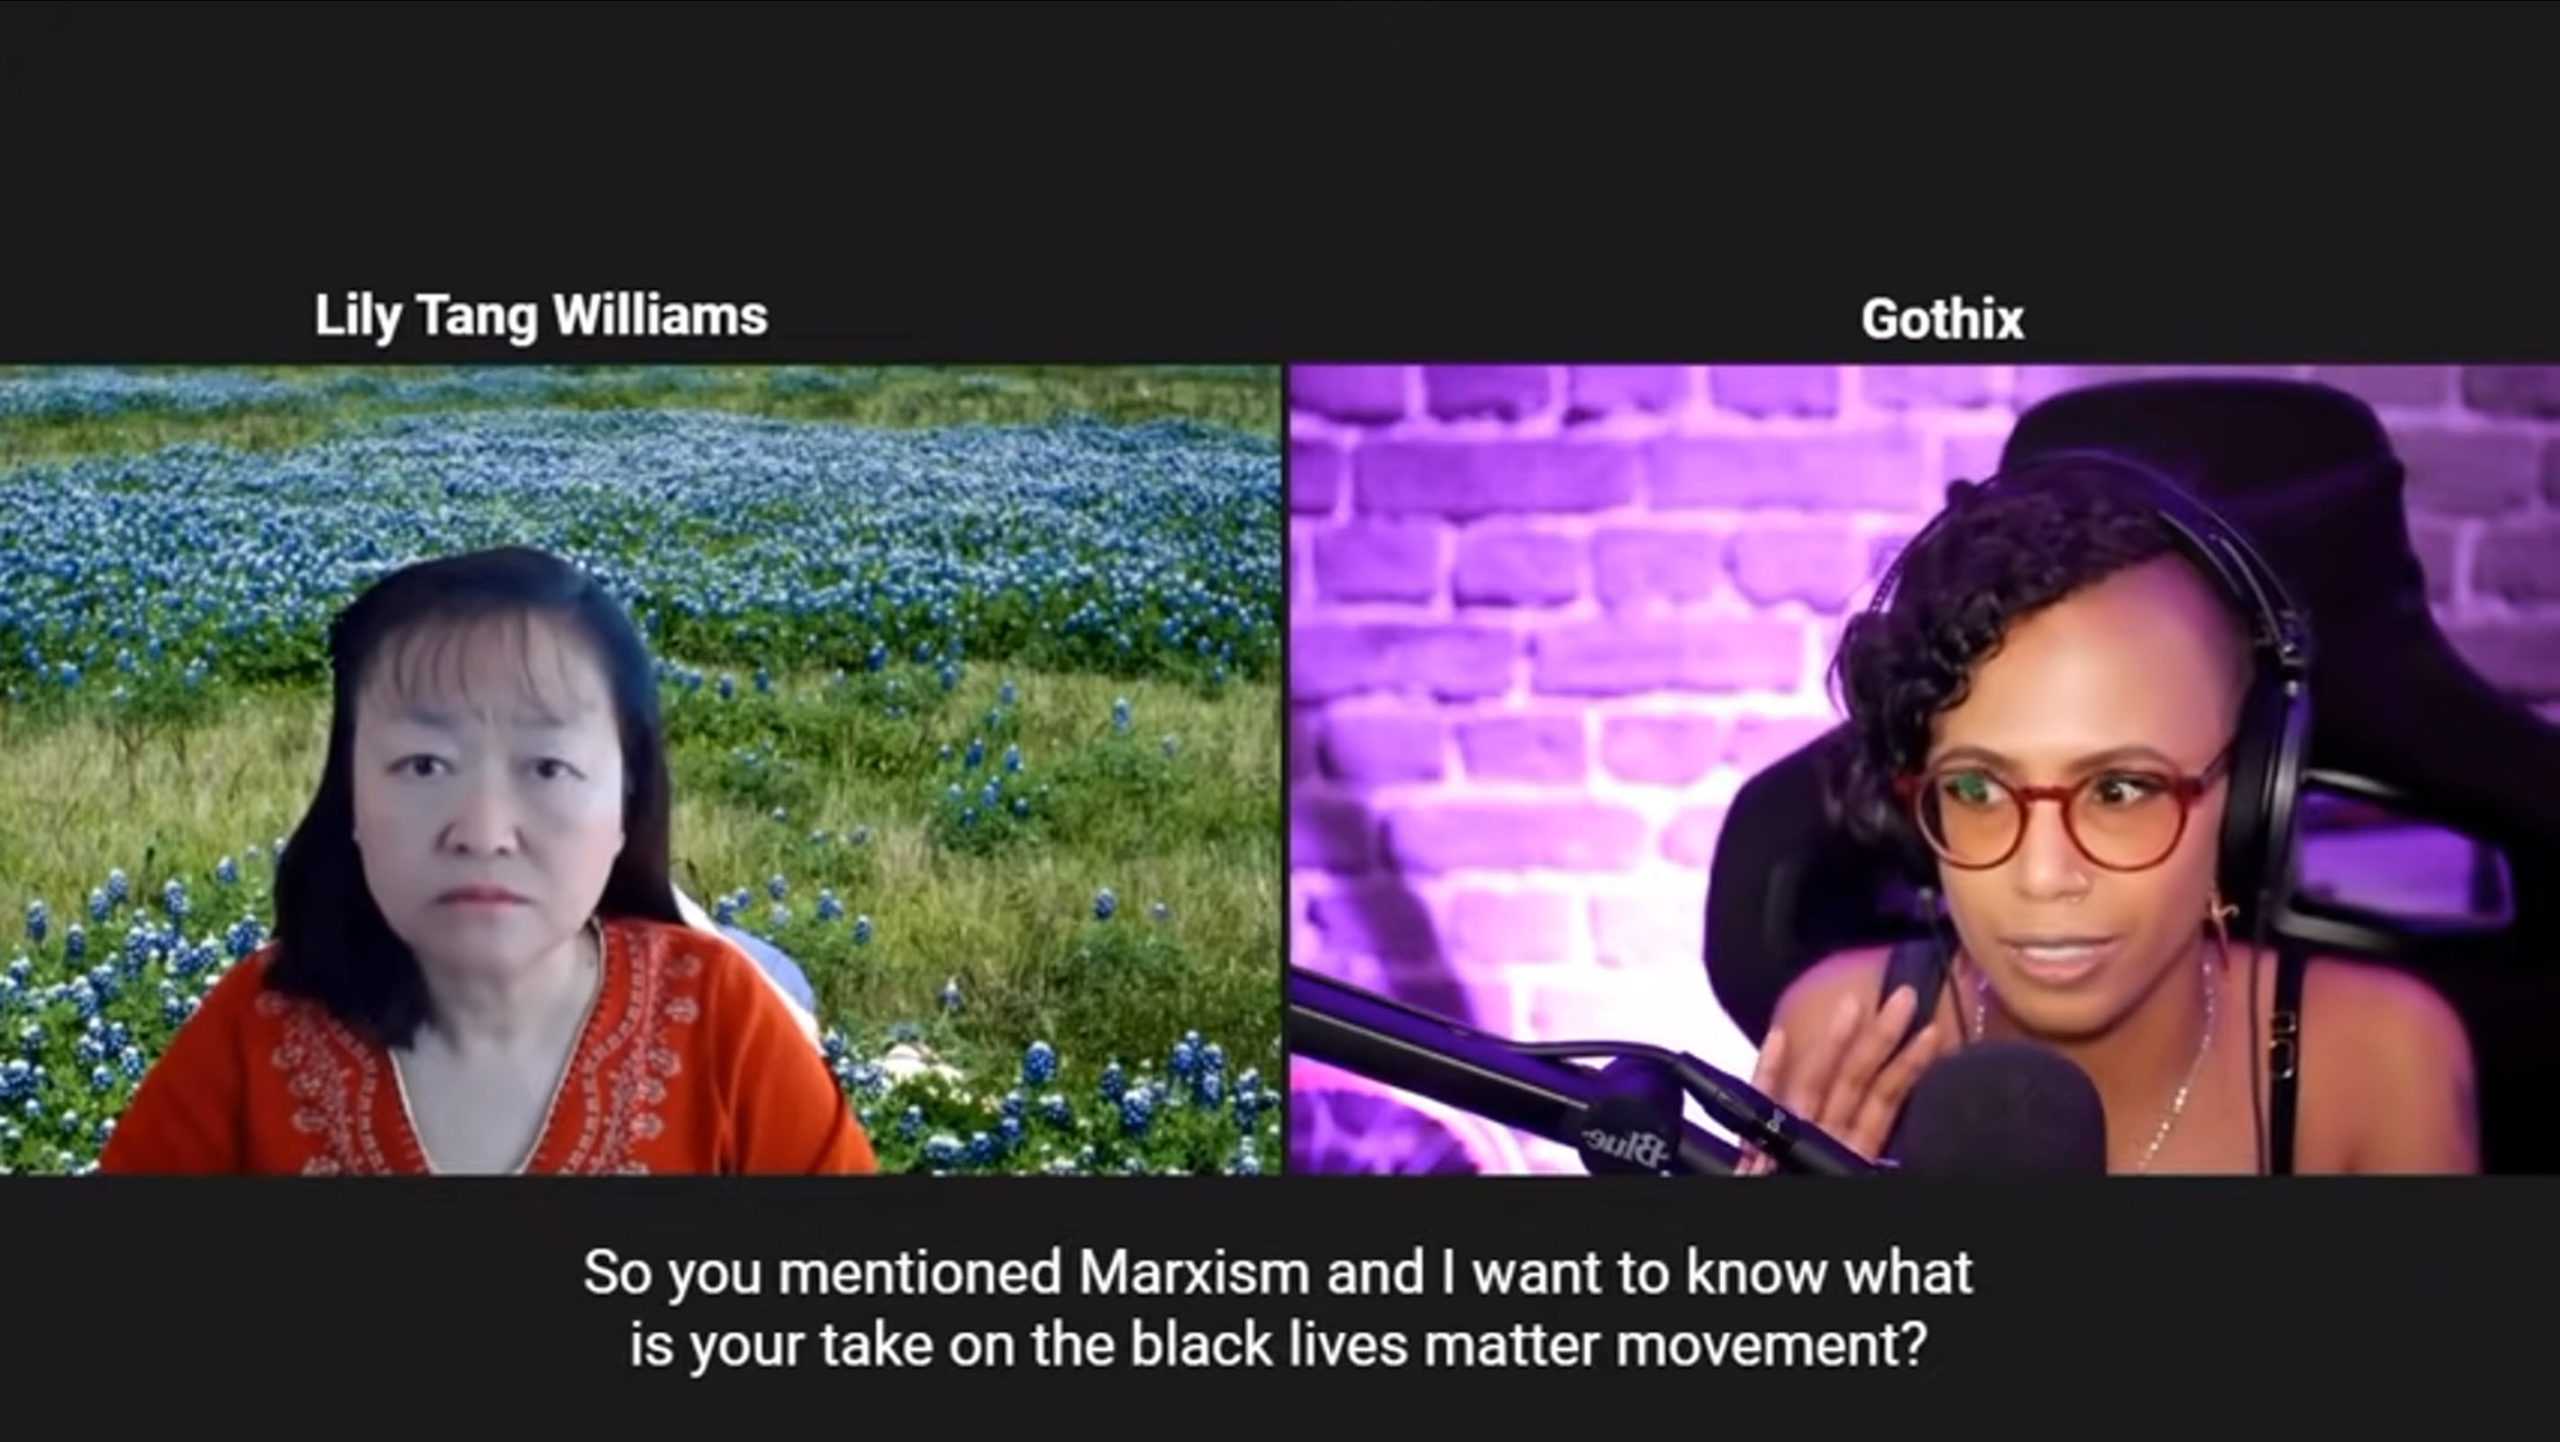 Lily Tang Williams interviewed by Gothix